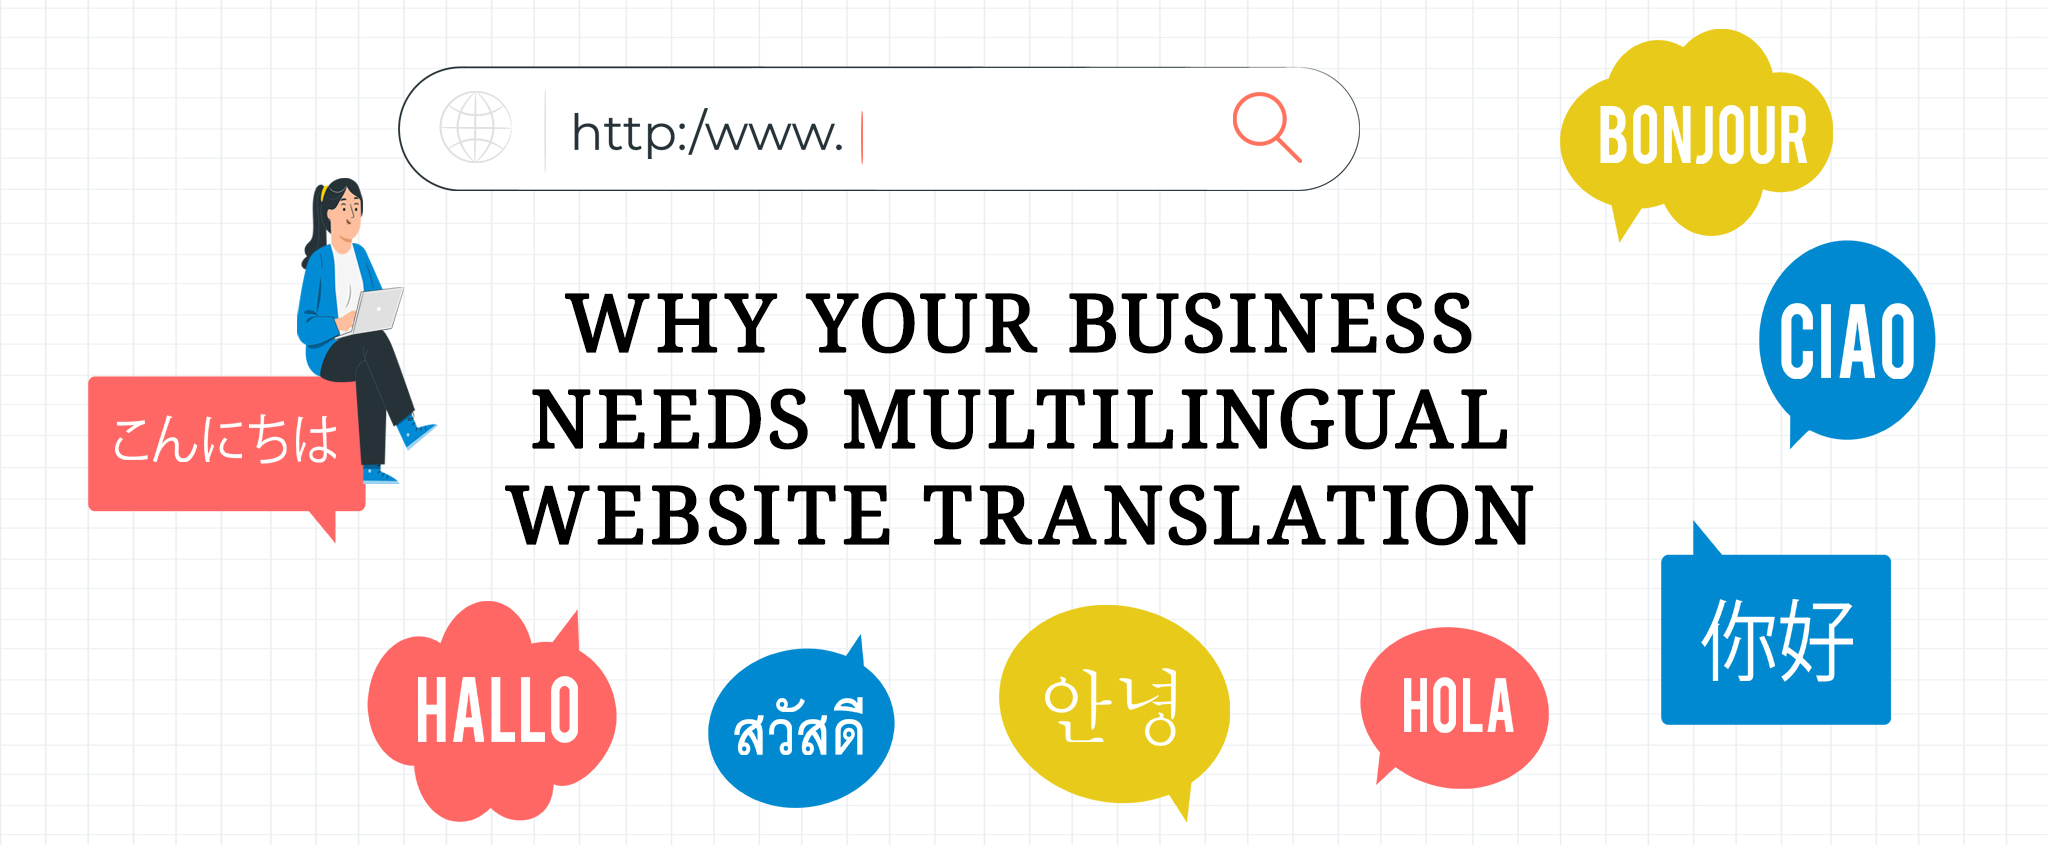 Why Your Business Needs Multilingual Website Translation